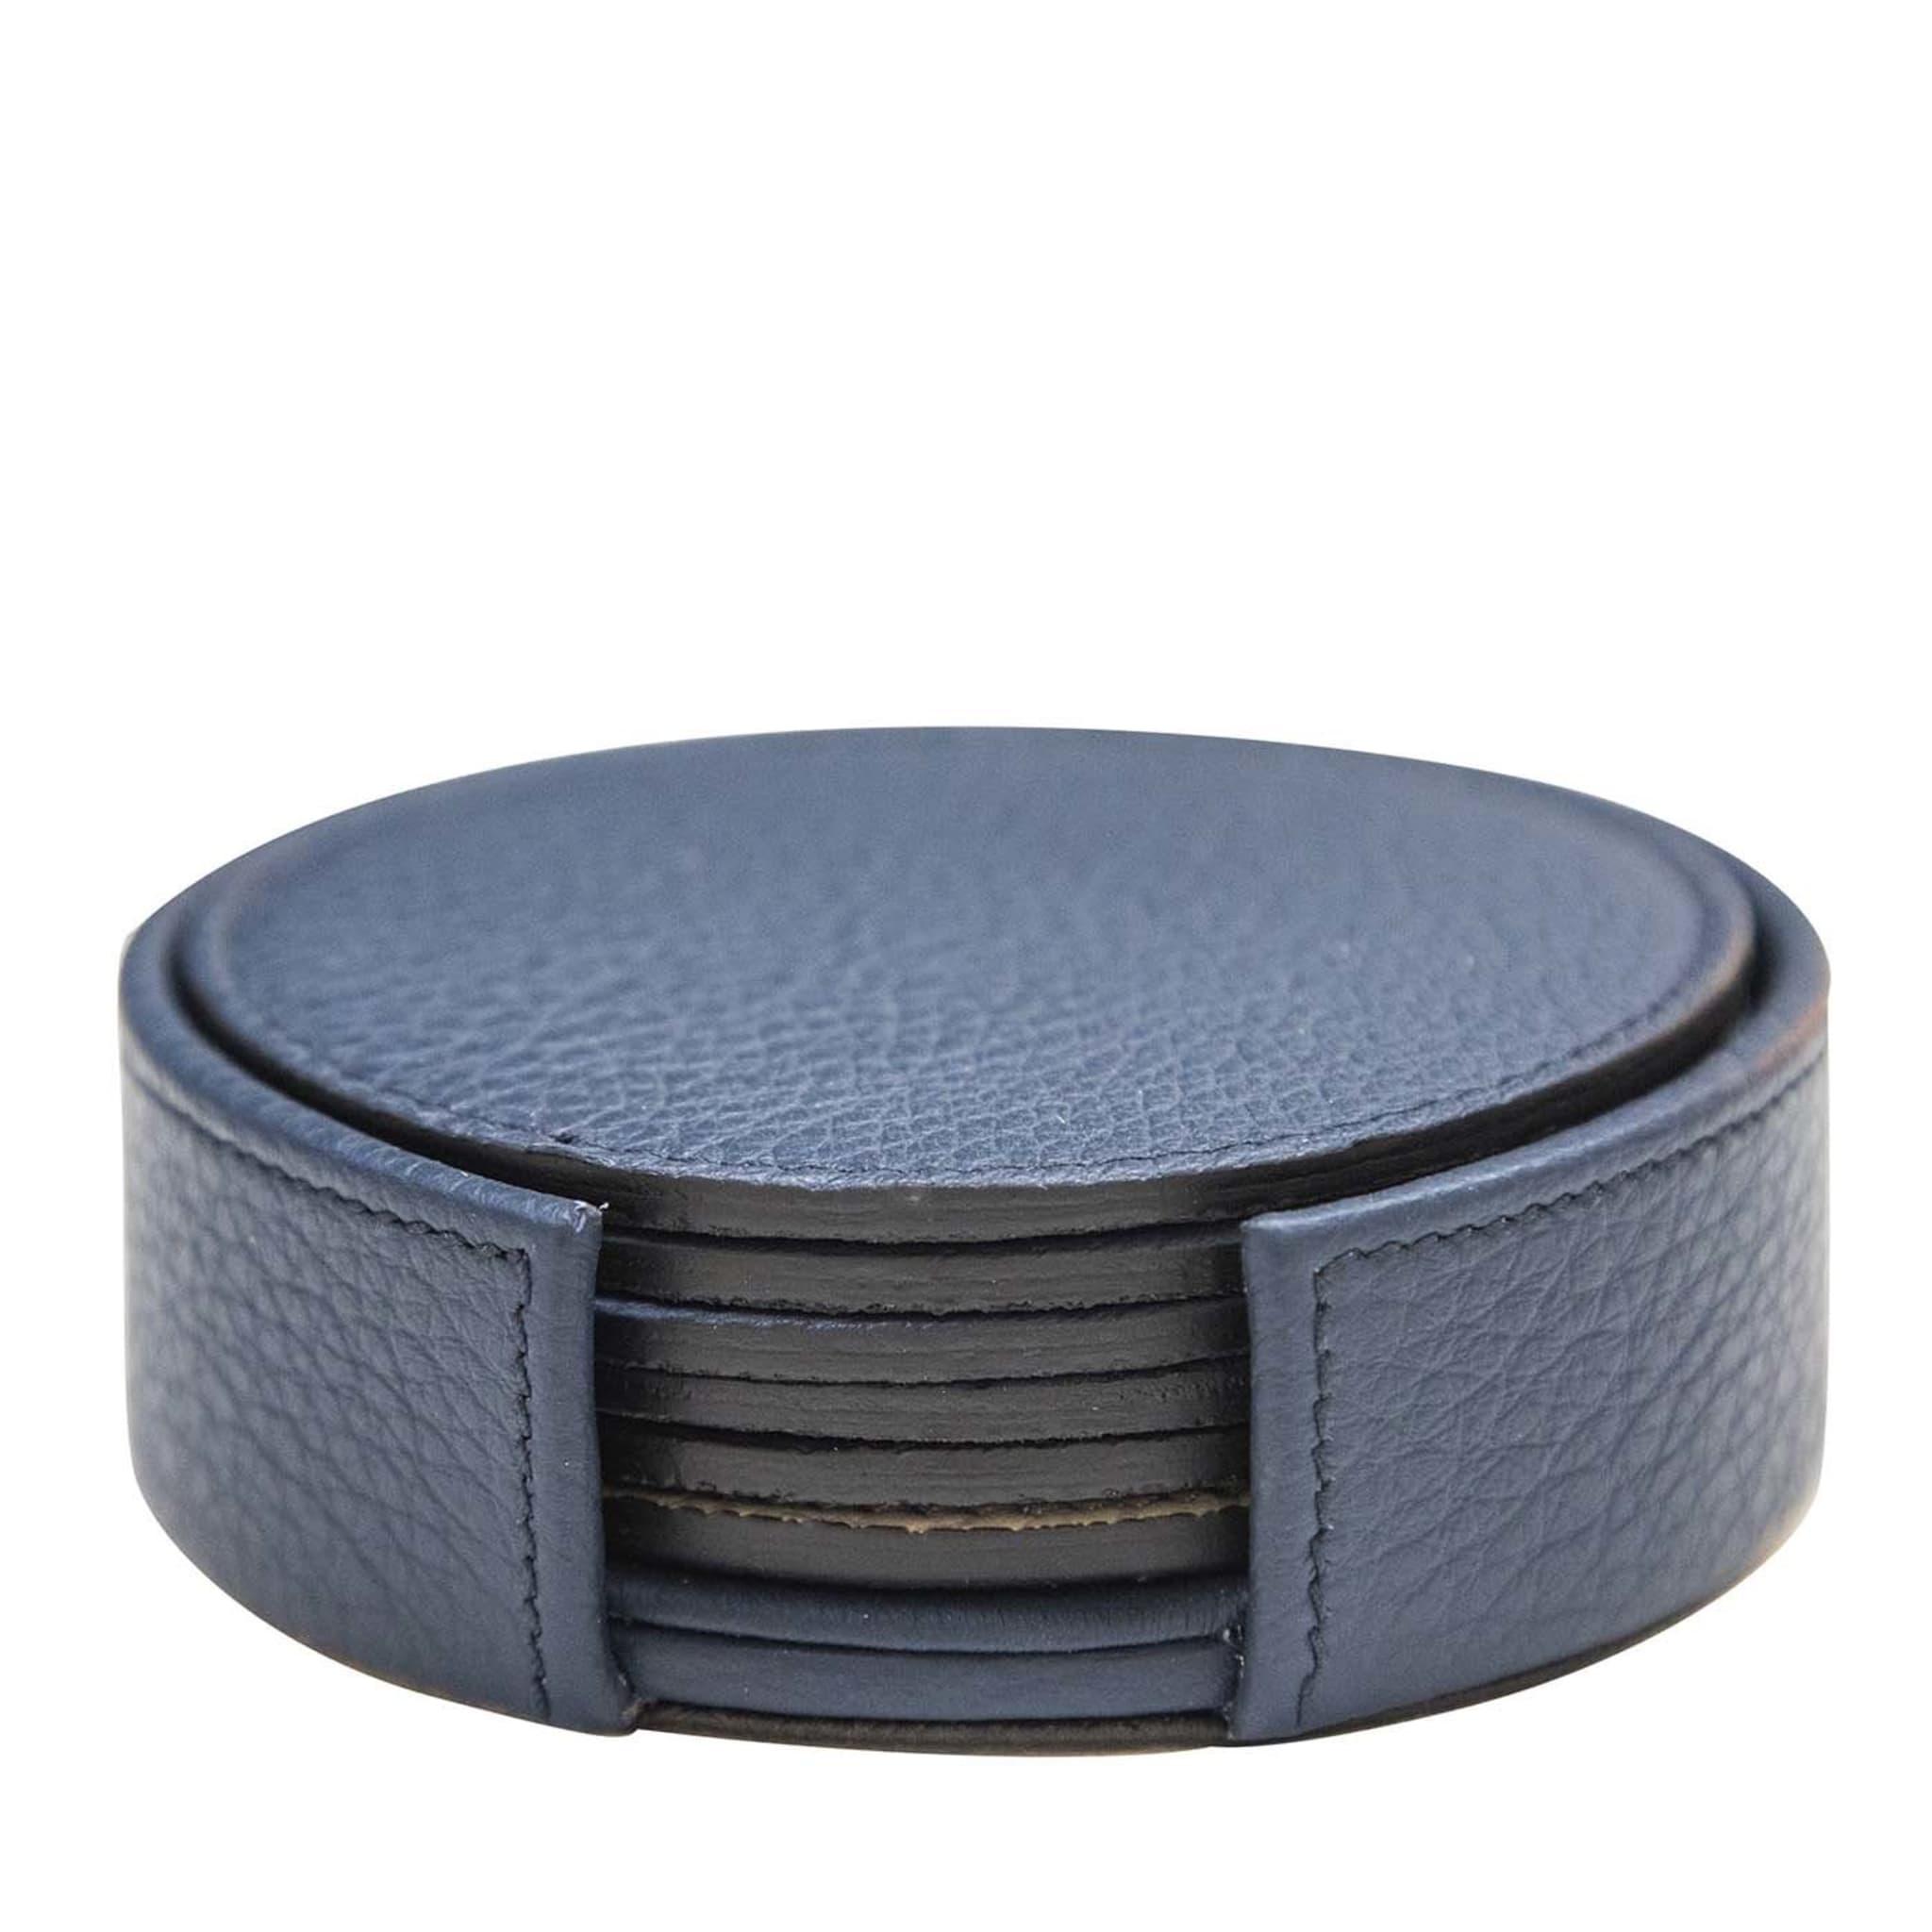 Set of 6 Leather Coasters in Royal Blue - Main view